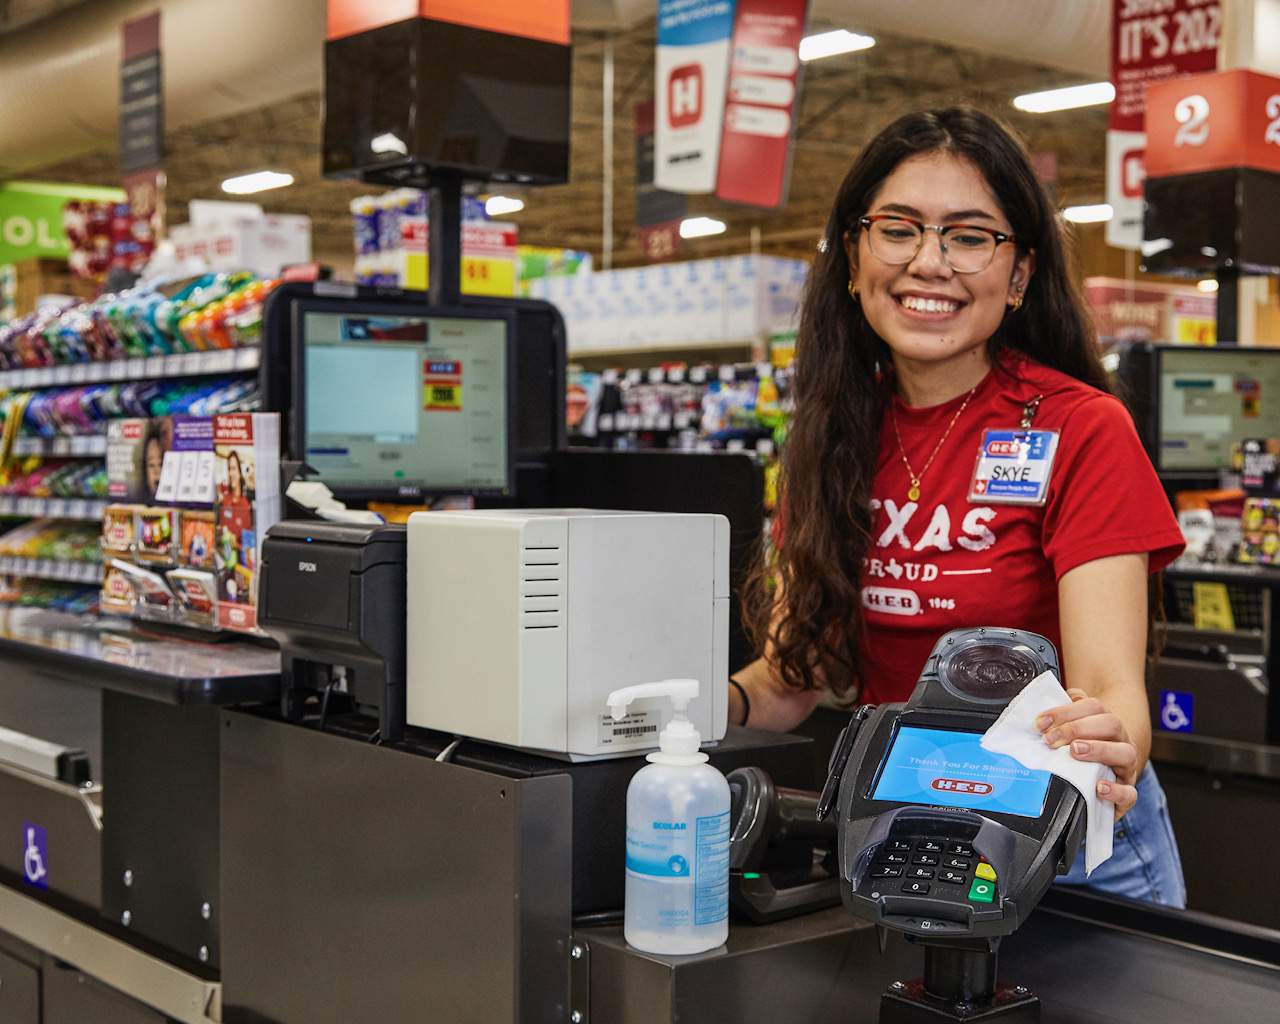 H-E-B gives employees $2 raise for their commitment during the coronavirus crisis